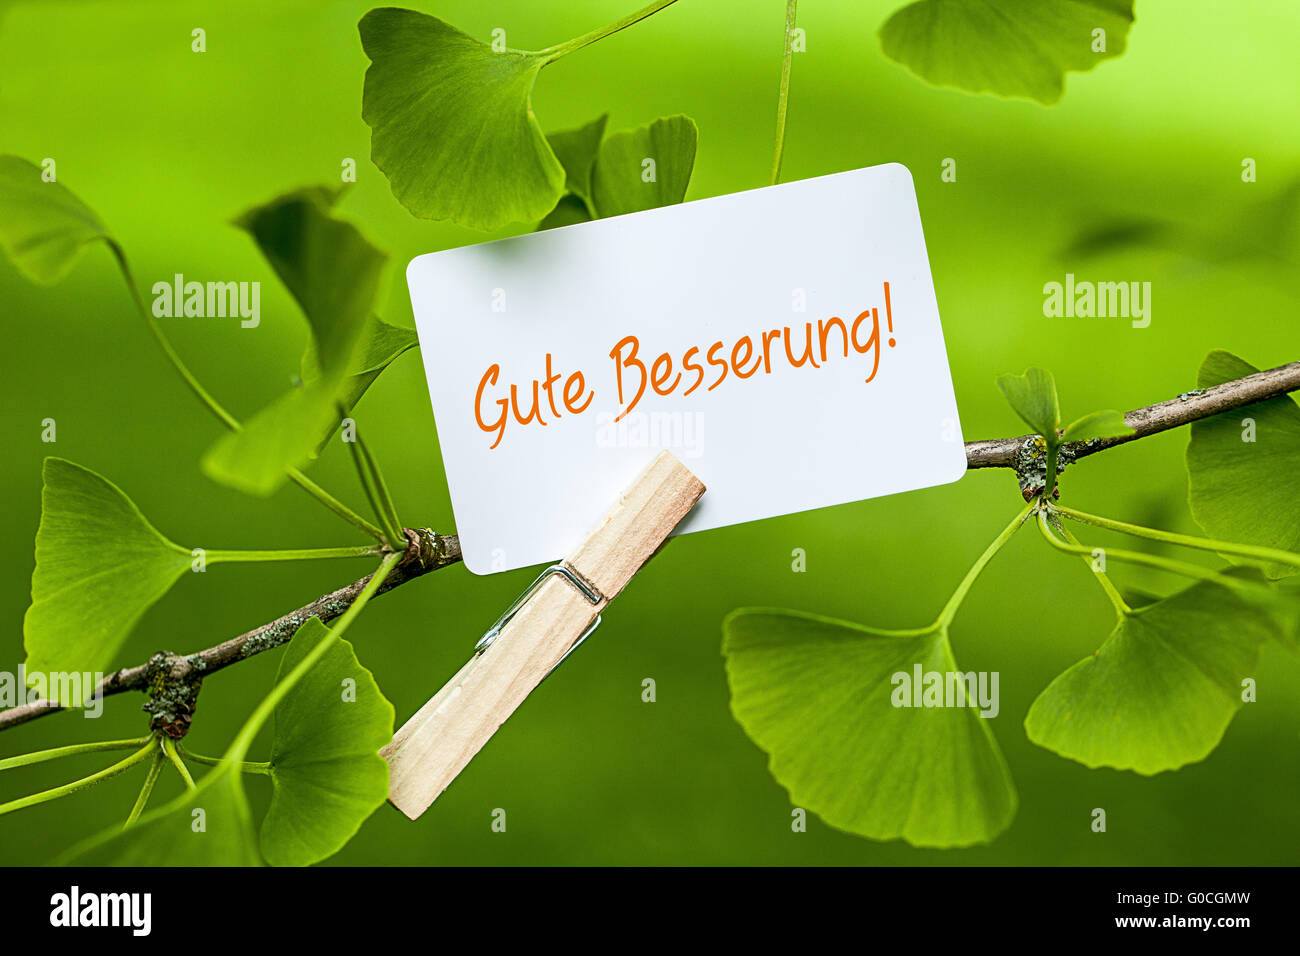 The words „Gute Besserung! in a Ginkgo Tree Stock Photo